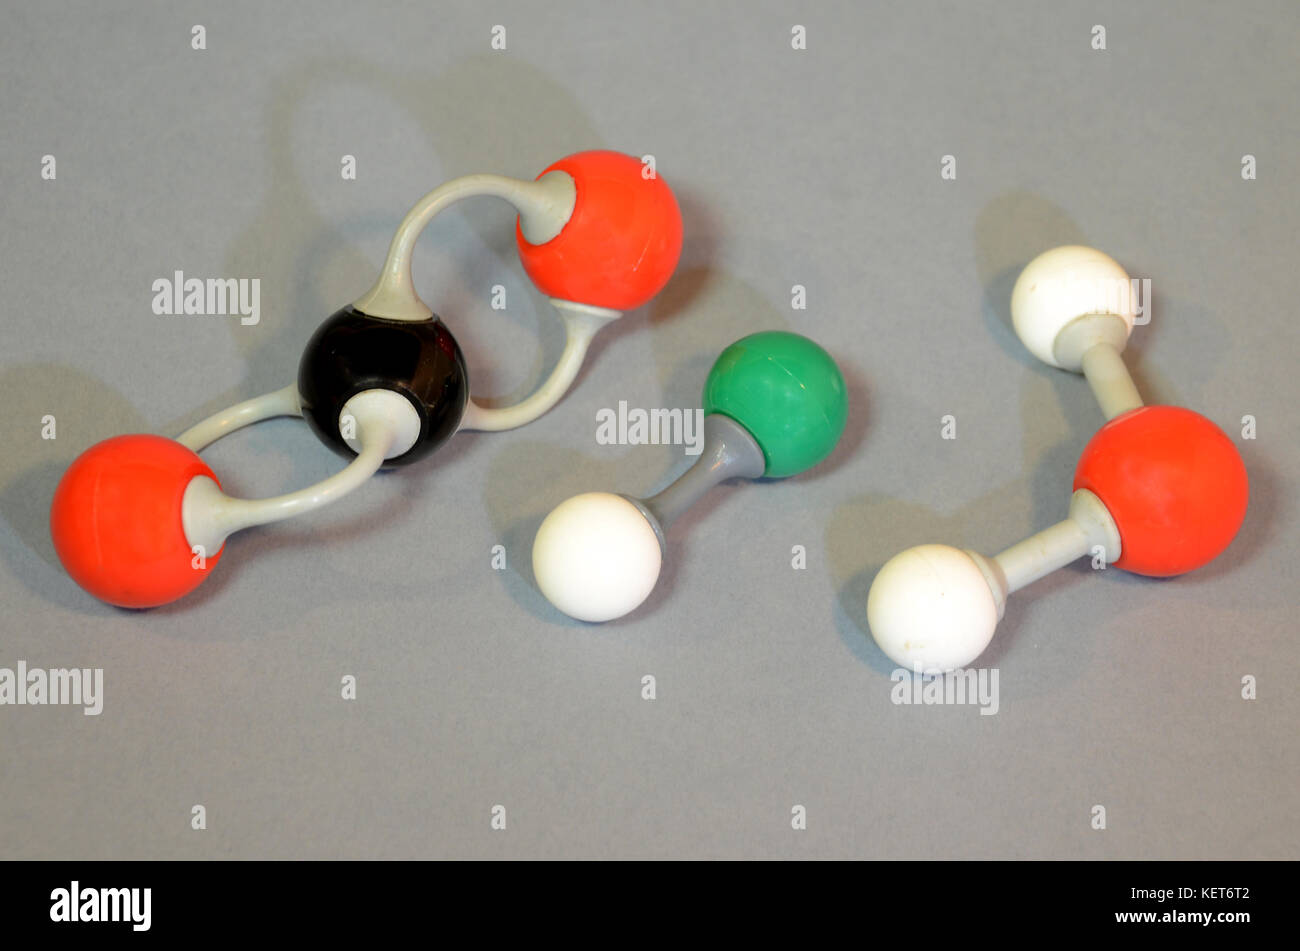 Molecule model of (left to right): Carbondioxide, hydrochloric gas, and water. Red is oxygen, black is carbon, green is chlorine, and white is hydroge Stock Photo